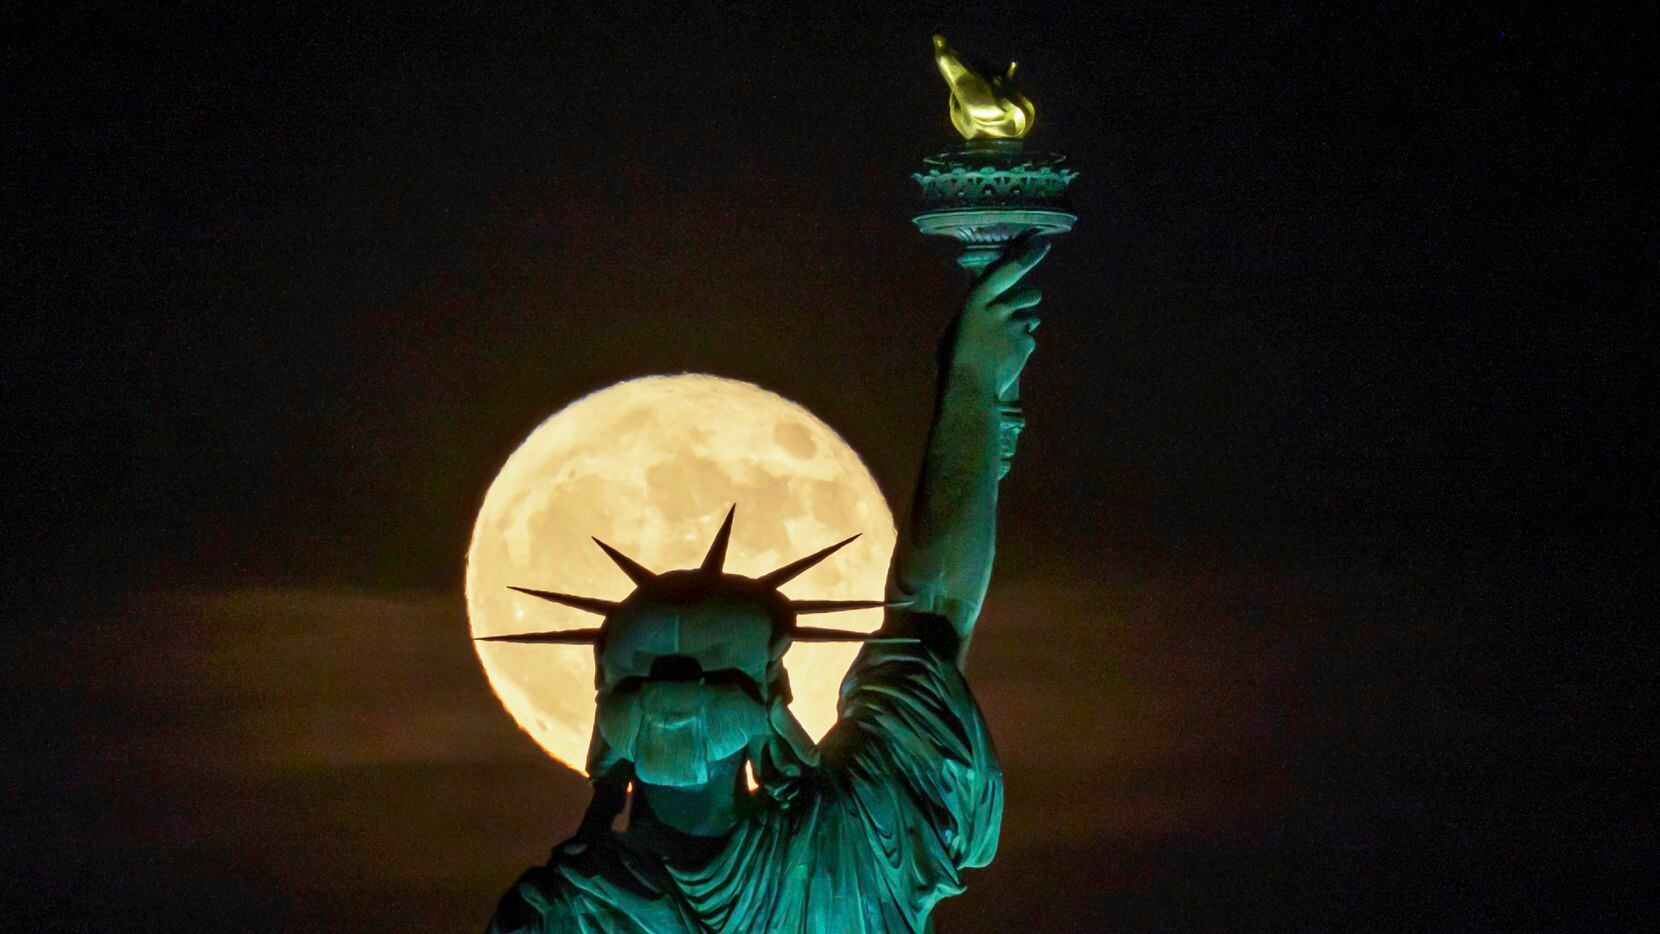 The Strawberry Supermoon rises in front of the Statue of Liberty in New York, June 14, 2022....